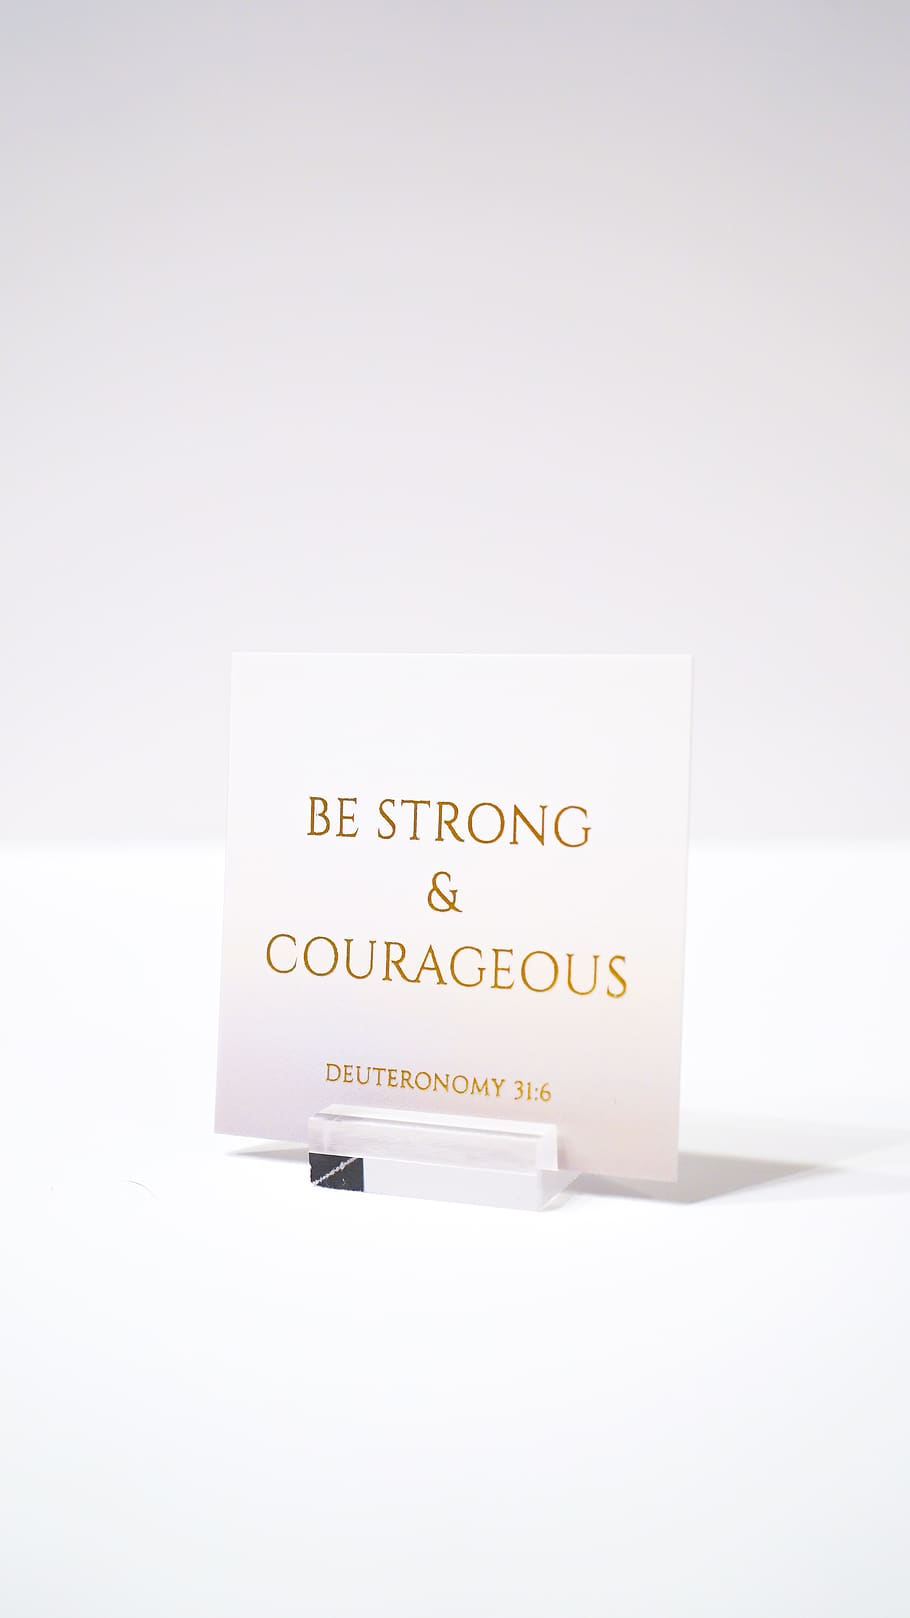 white paper with be strong and courageous printed text, studio shot, HD wallpaper